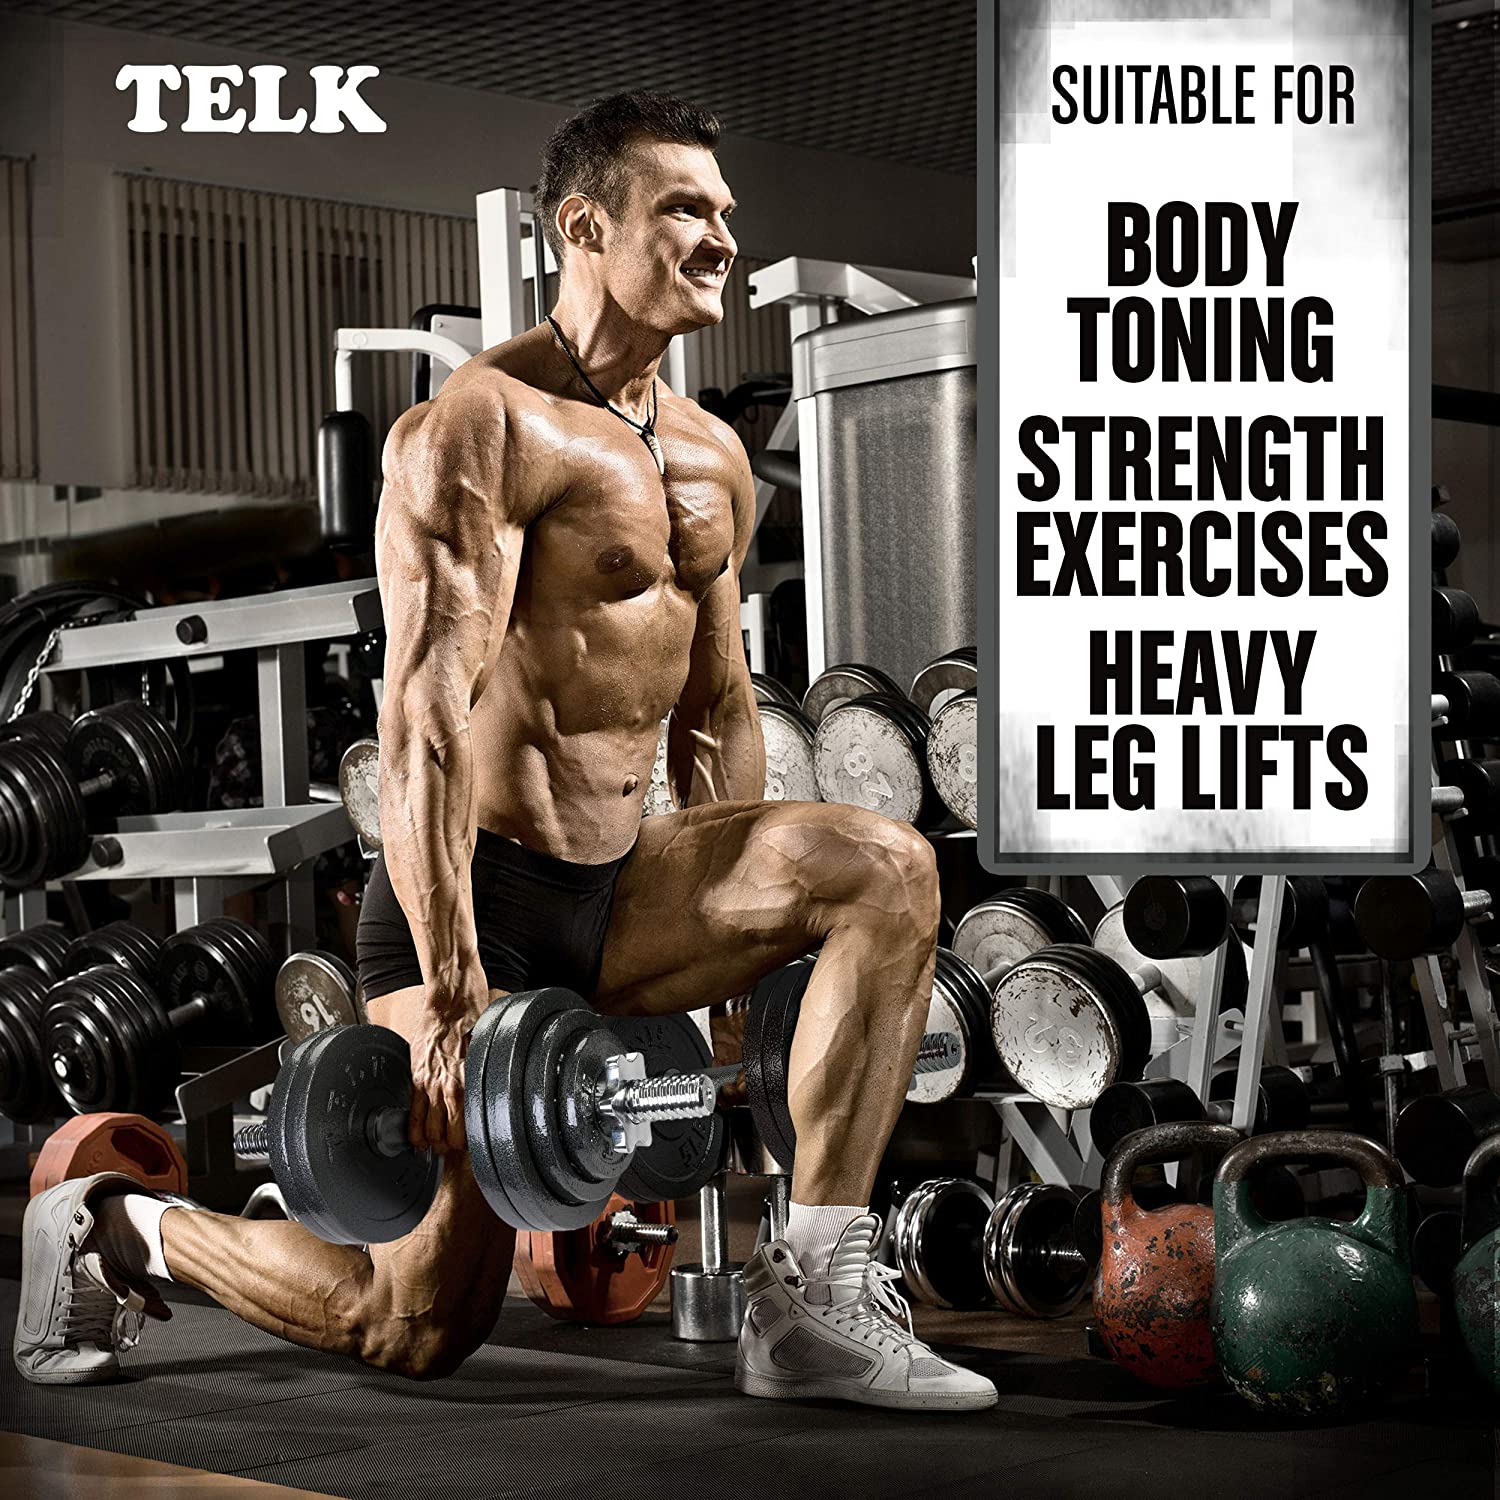 Telk Fitness Adjustable Dumbbells 45 Lbs., Hand Weights for Home Gym - image 2 of 6